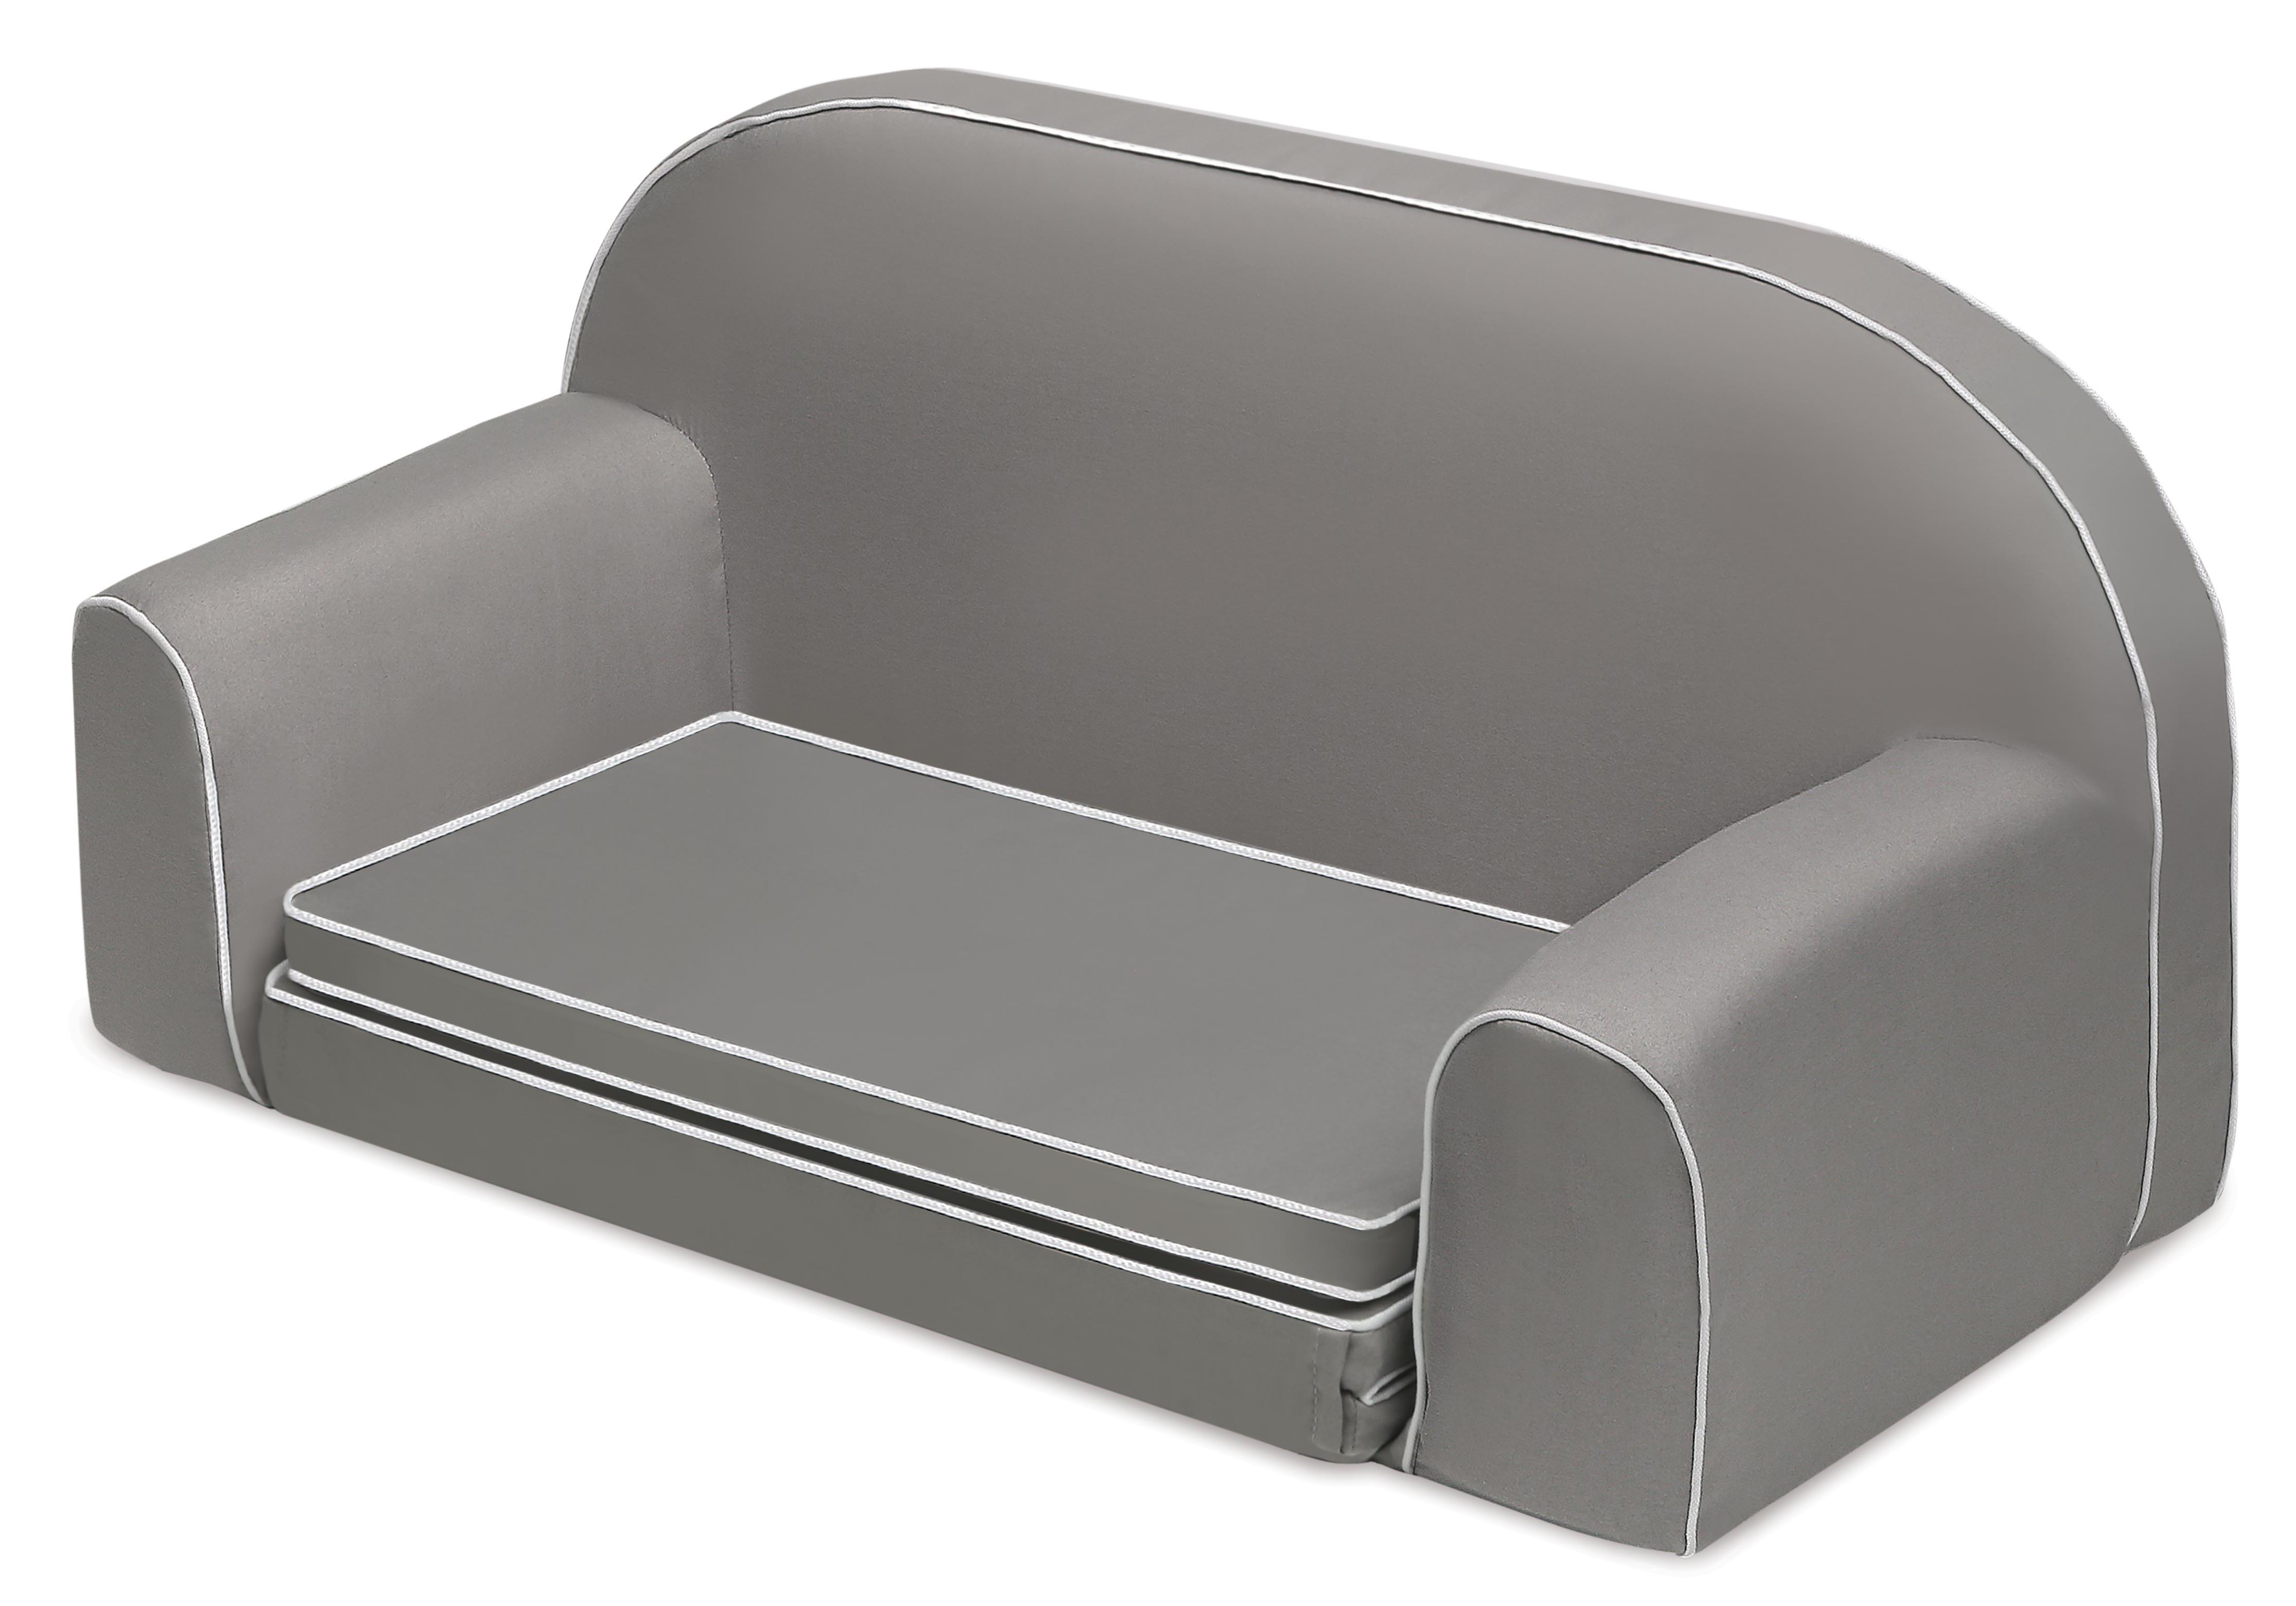 Upholstered Doll Sofa with Foldout Bed and Storage Pockets - Executive Gray